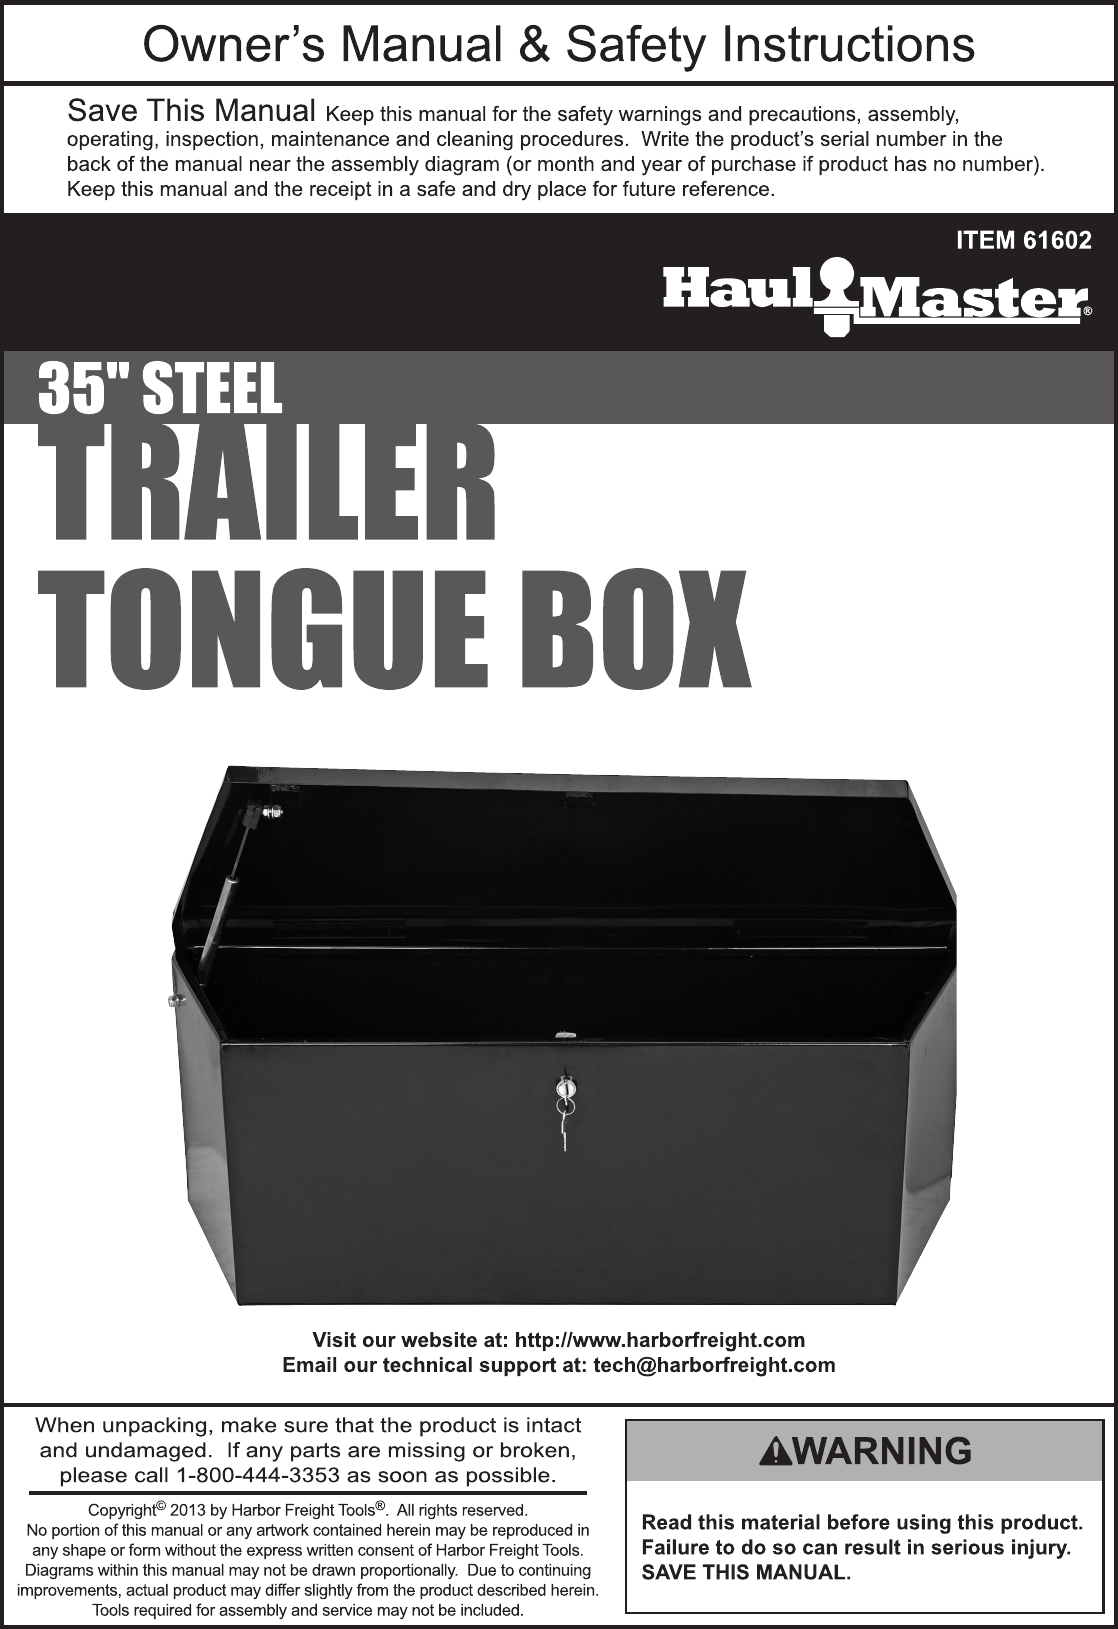 Page 1 of 4 - Harbor-Freight Harbor-Freight-2-1-3-Cu-Ft-Steel-Trailer-Tongue-Box-Product-Manual-  Harbor-freight-2-1-3-cu-ft-steel-trailer-tongue-box-product-manual